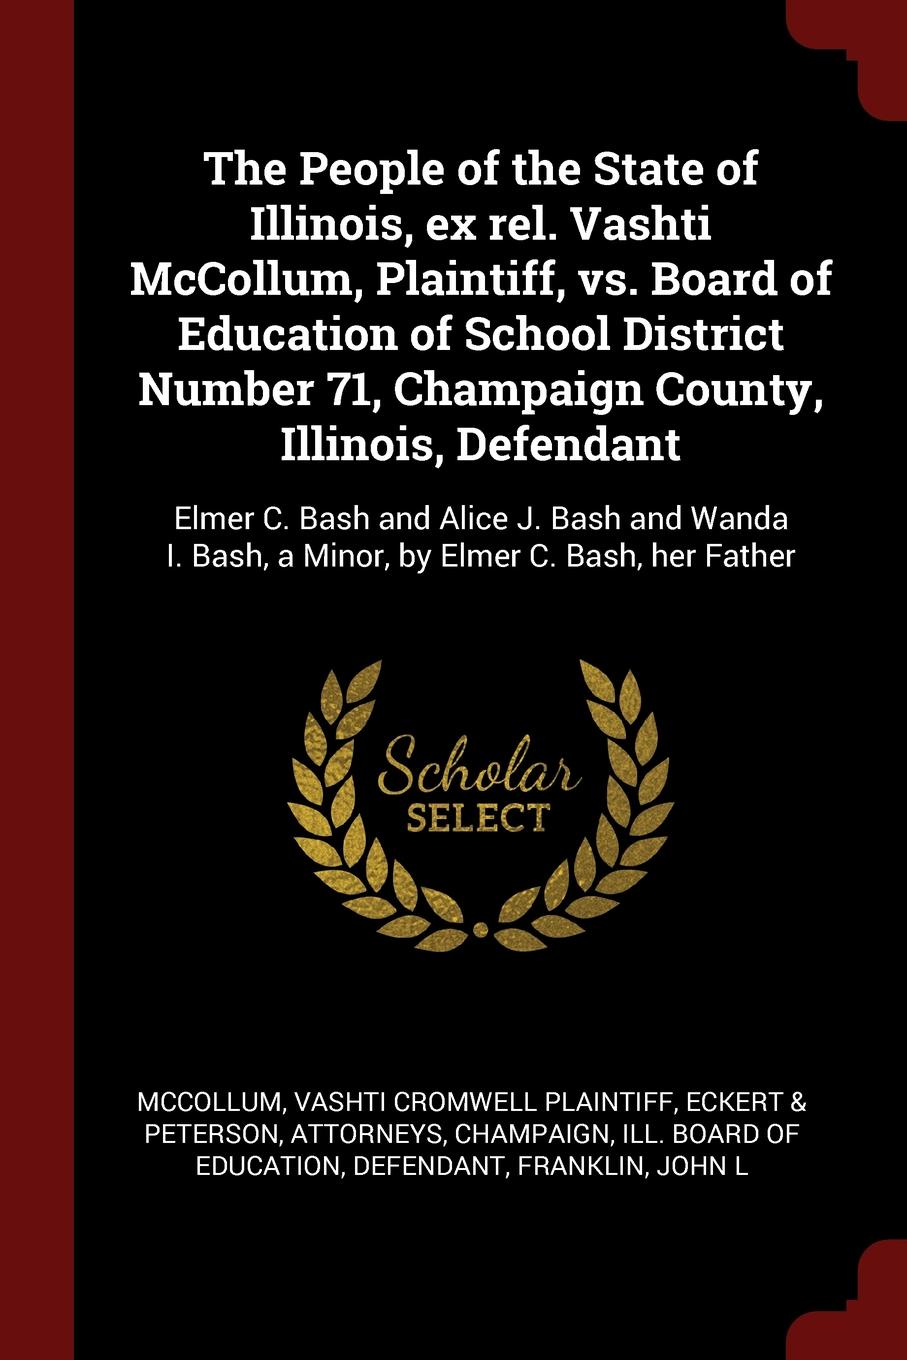 The People of the State of Illinois, ex rel. Vashti McCollum, Plaintiff, vs. Board of Education of School District Number 71, Champaign County, Illinois, Defendant. Elmer C. Bash and Alice J. Bash and Wanda I. Bash, a Minor, by Elmer C. Bash, her ...